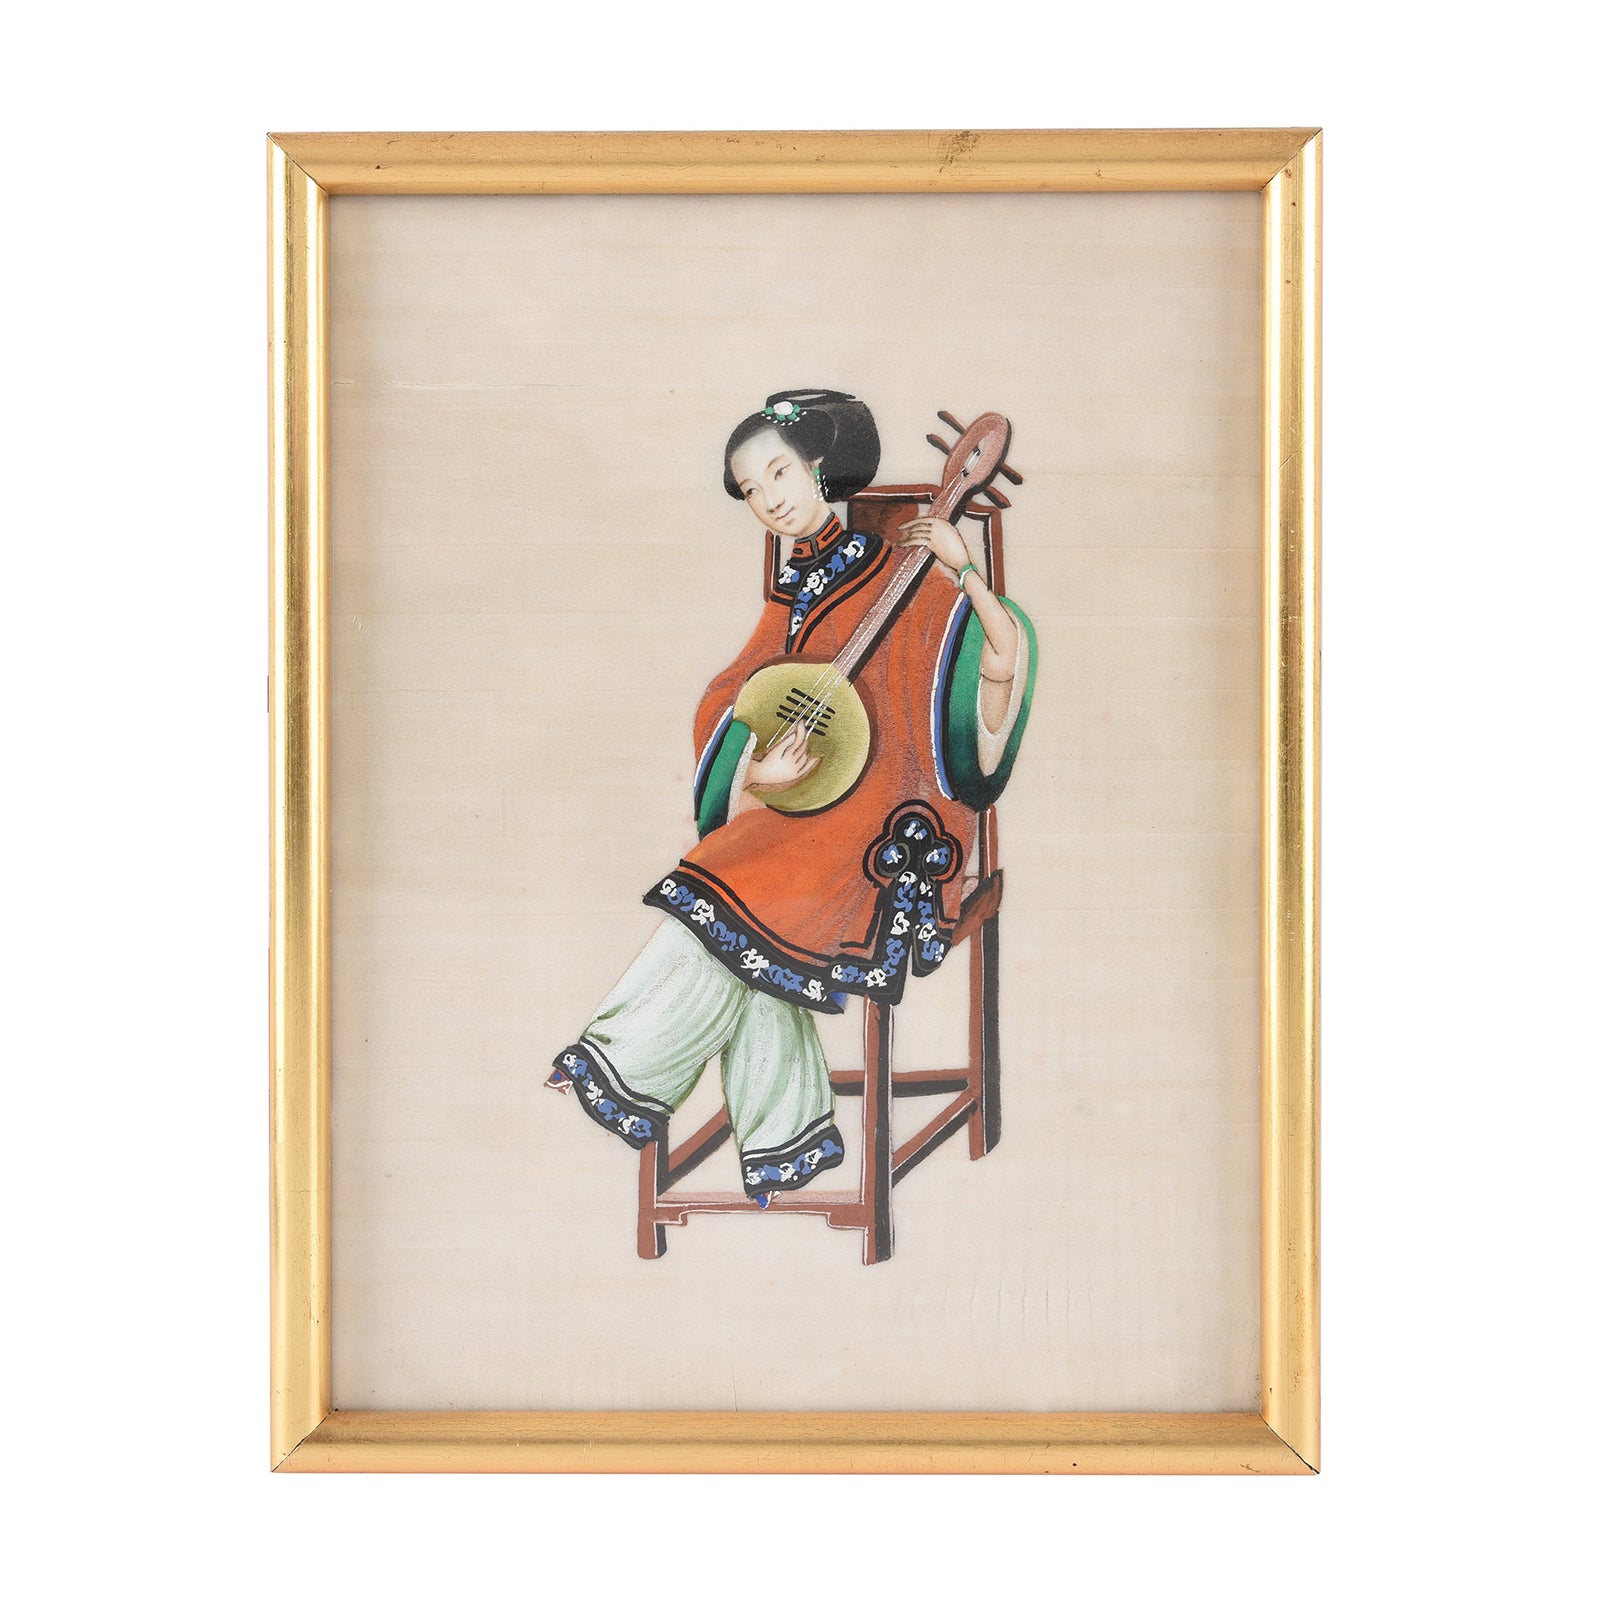 Antique Framed Watercolour Painting of A Musician on Pith Paper - 19th Century I Indigo Antiques